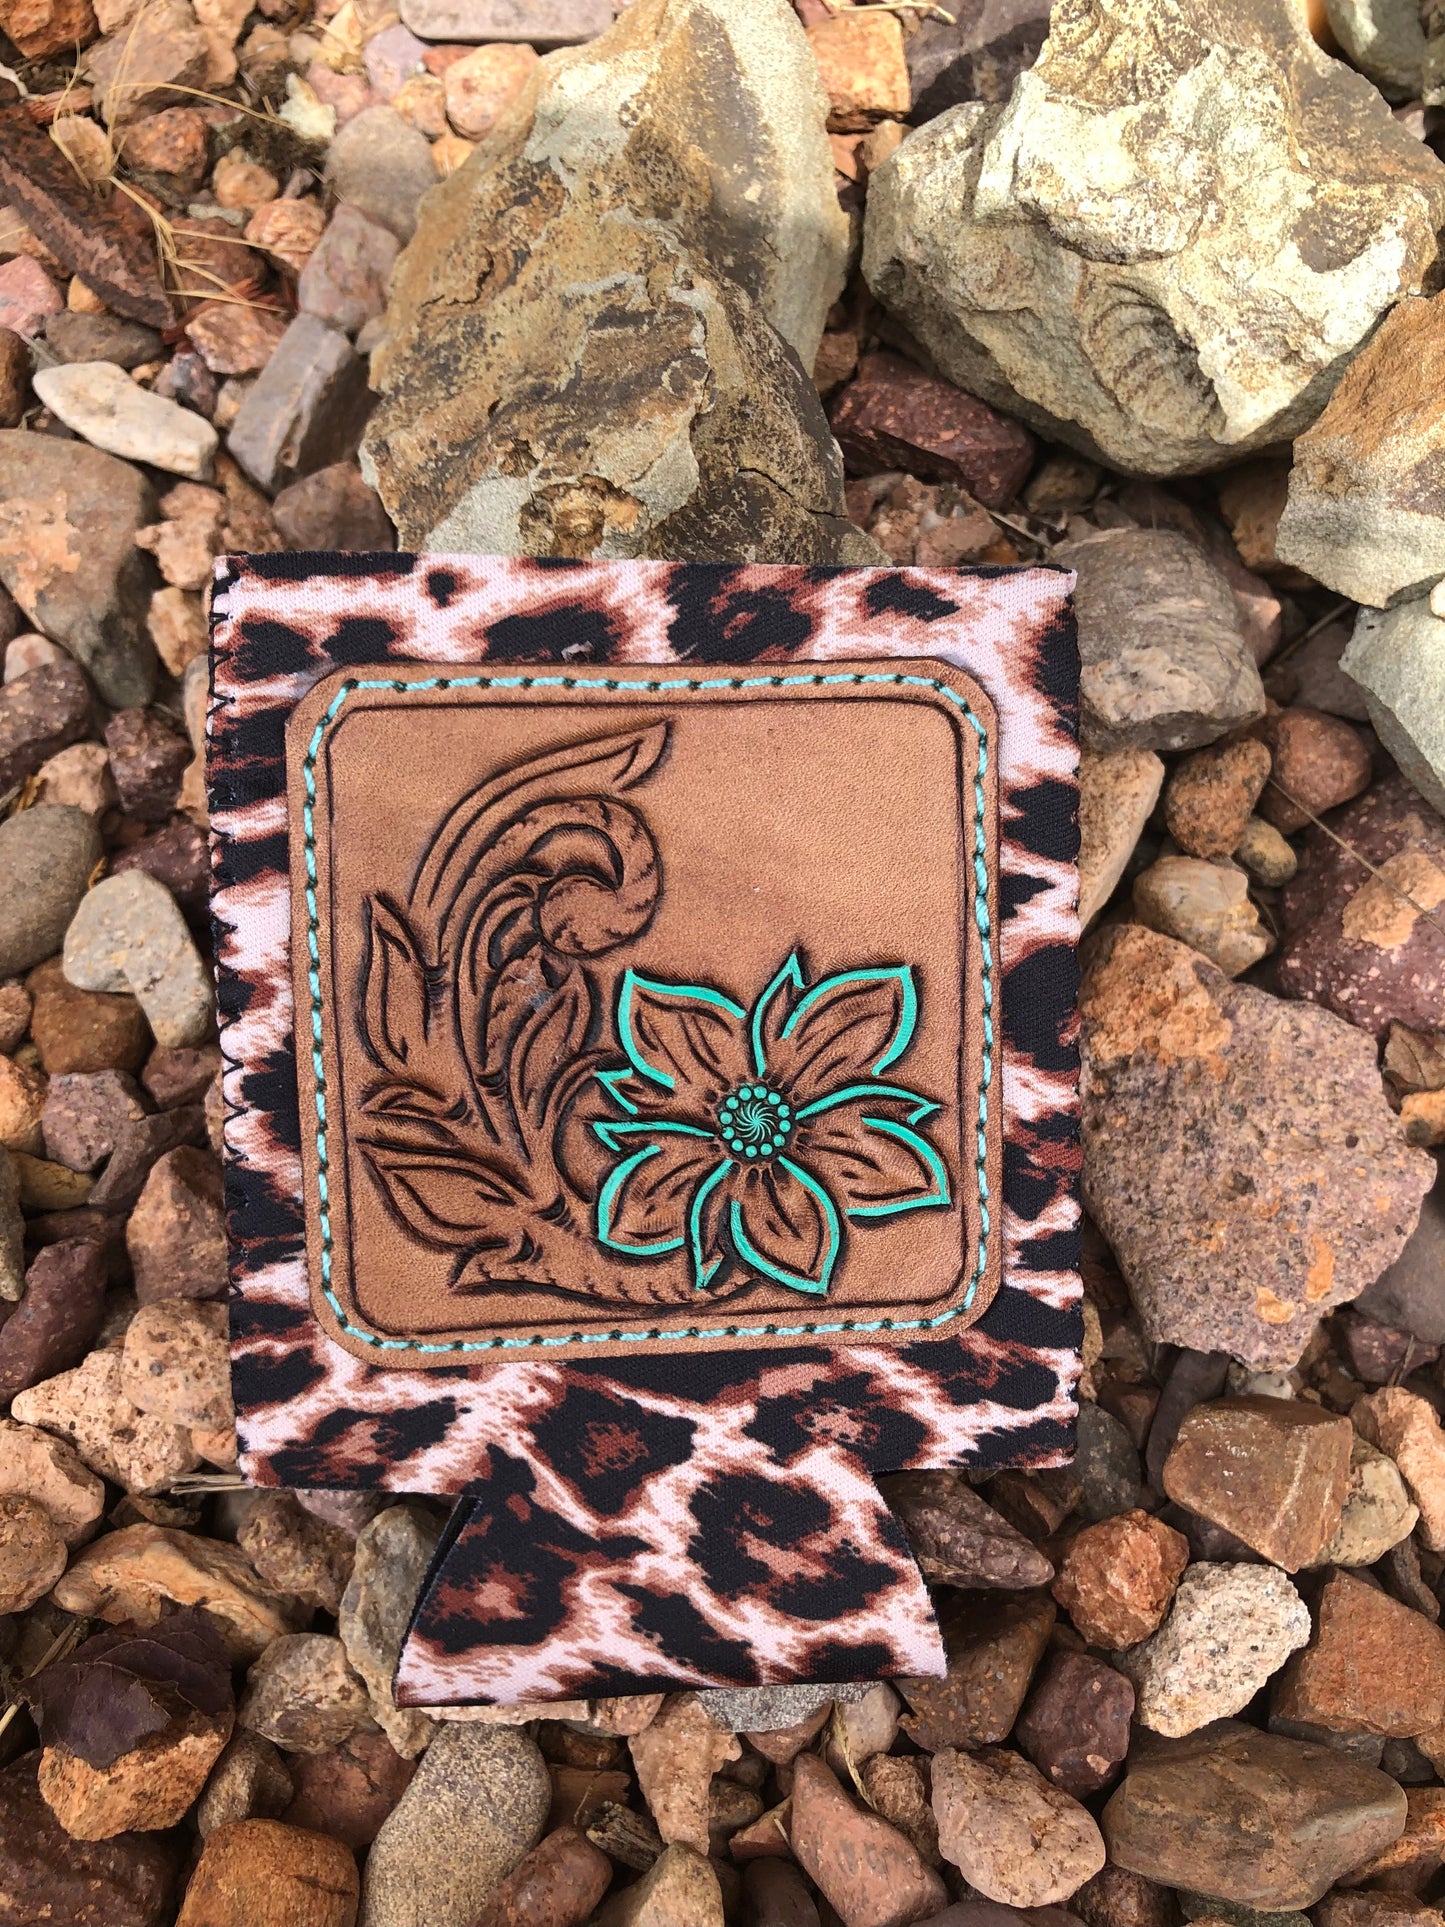 Western tooled leather floral can koozie